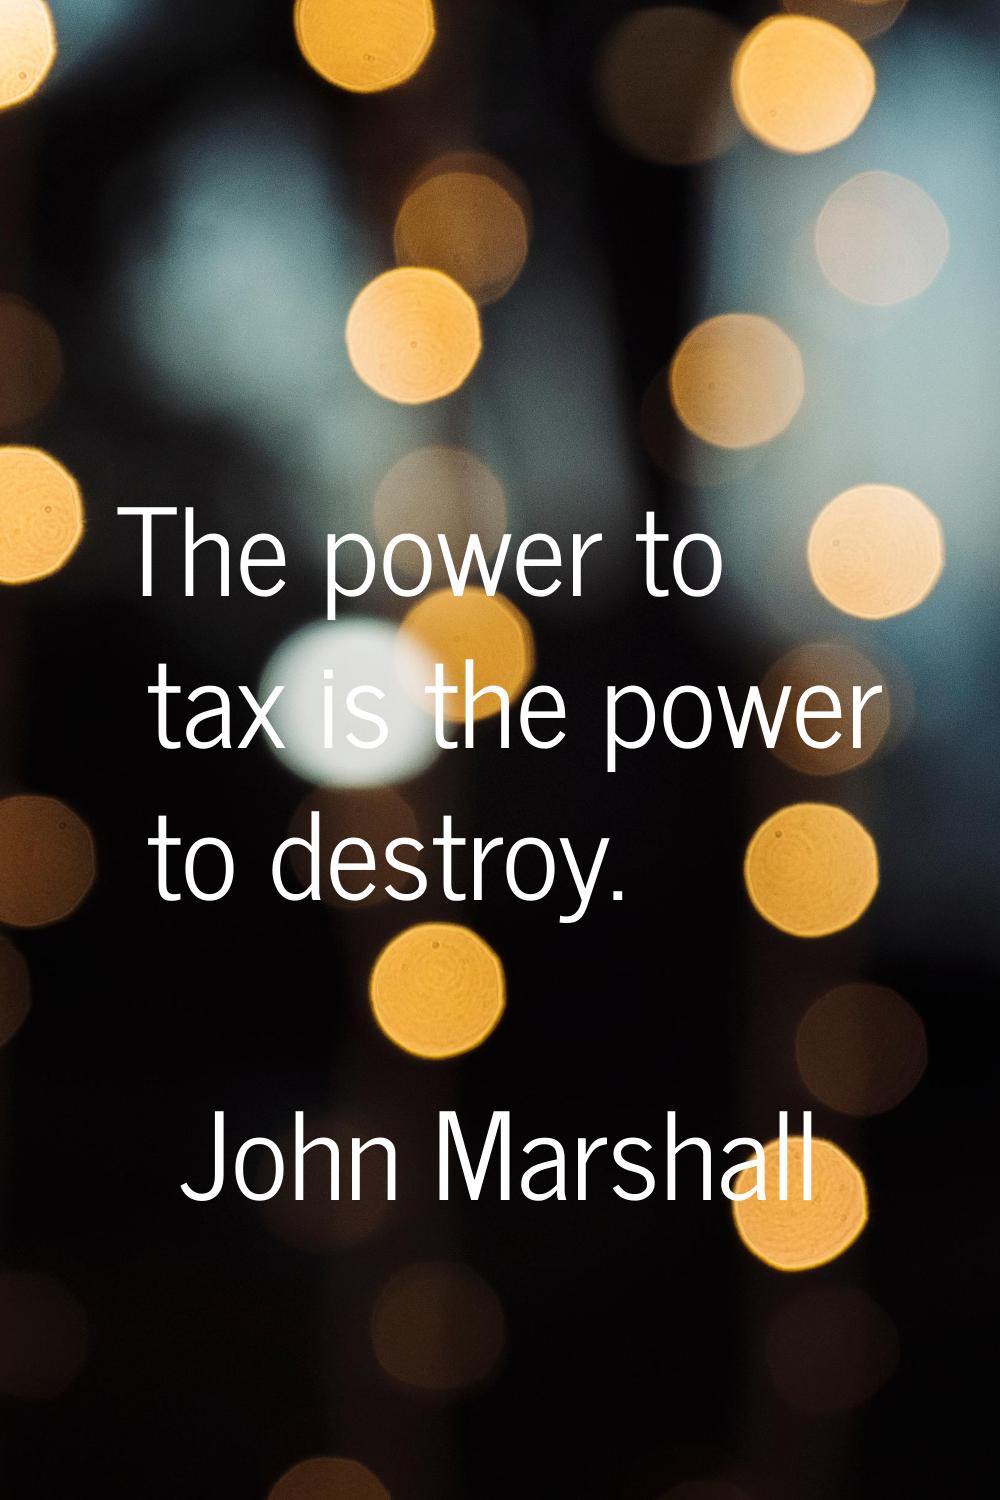 The power to tax is the power to destroy.